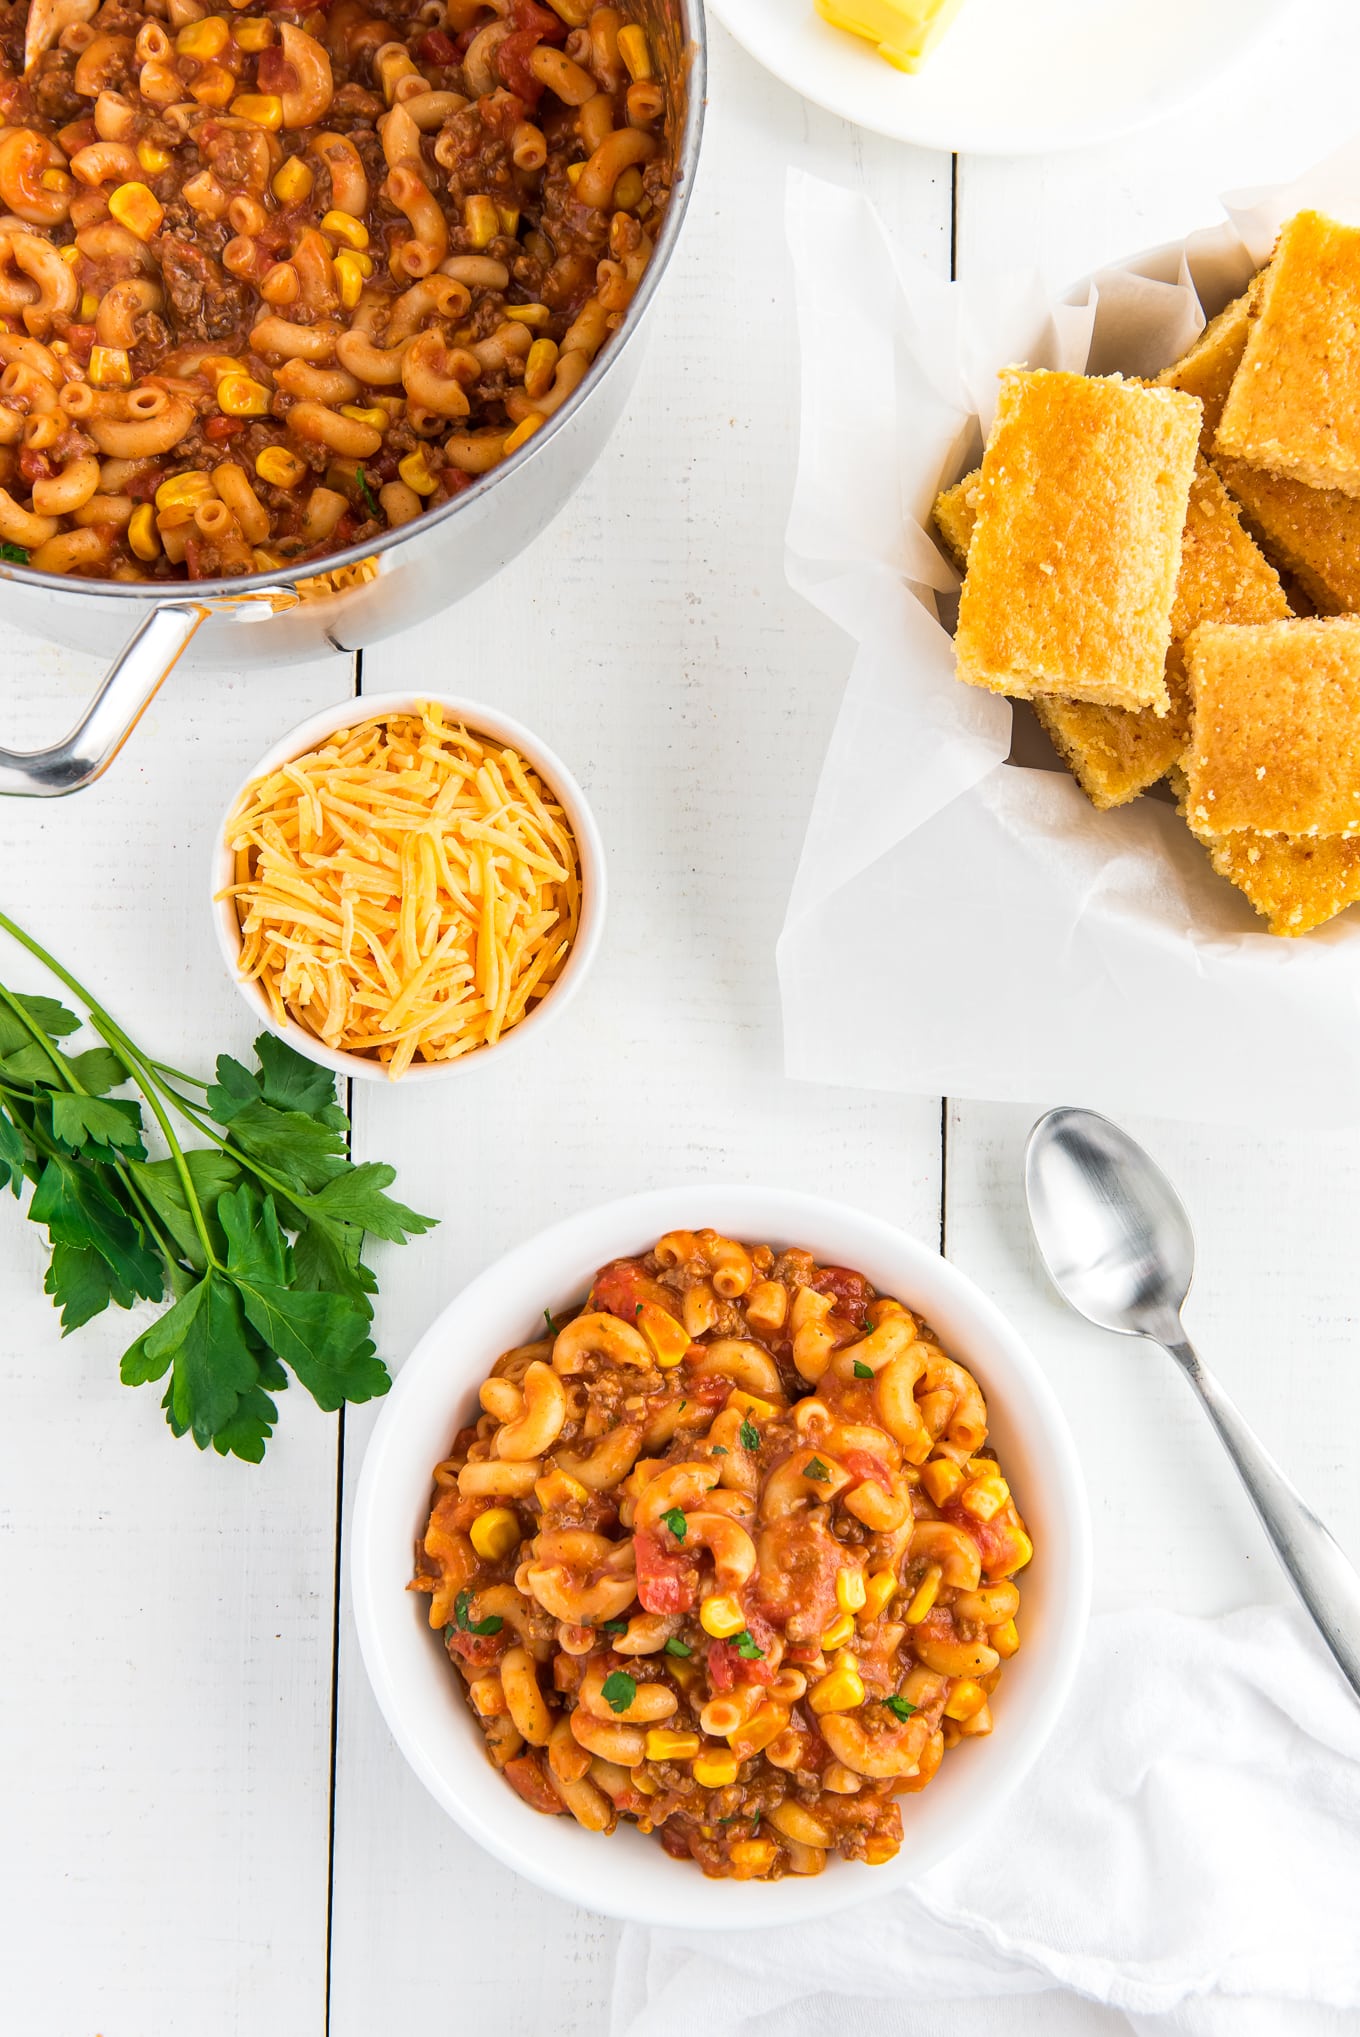 A bowl of beef goulash on the table with a bowl of shredded cheese, cornbread in a basket and a pot of more.